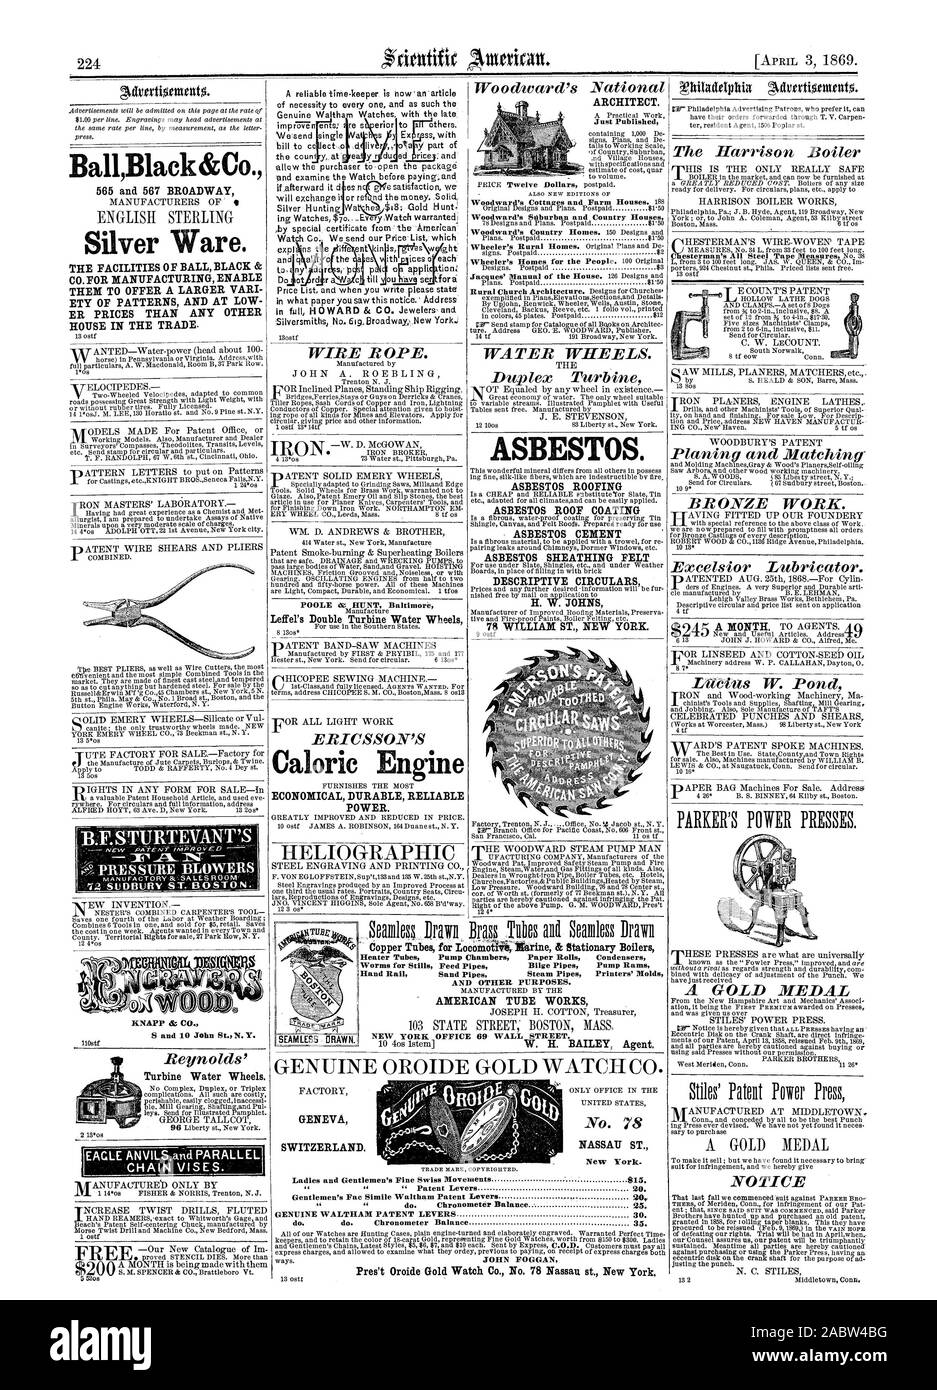 BallBlack&Co. Silver Ware. THE FACILITIES OF BALL BLACK & CO. FOR MANUFACTURING ENABLE THEM TO OFFER A LARGER VARI ETY OF PATTERNS AND AT LOW ER PRICES THAN ANY OTHER HOUSE IN THE TRADE. NEW PATVT/NPR 0% ED PRE 8 SURE BLOWERS KNAPP 55 CO. and 10 John St. N. Y. Turbine Water Wheels. POOLE OZ 7NT Baltimore Leffel's Double Turbine Water Wheels Caloric Engine ECONOMICAL DURABLE RELIABLE POWER. ARCHITECT. Just Published ASBESTOS. ASBESTOS ROOFING ASBESTOS ROOF COATING ASBESTOS CEMENT ASBESTOS SHEATHING FELT DESCRIPTIVE CIRCULARS H. W. 'JOHNS 78 WILLIAM ST. NEW YORK. 1' Woodward's Suburban and Stock Photo